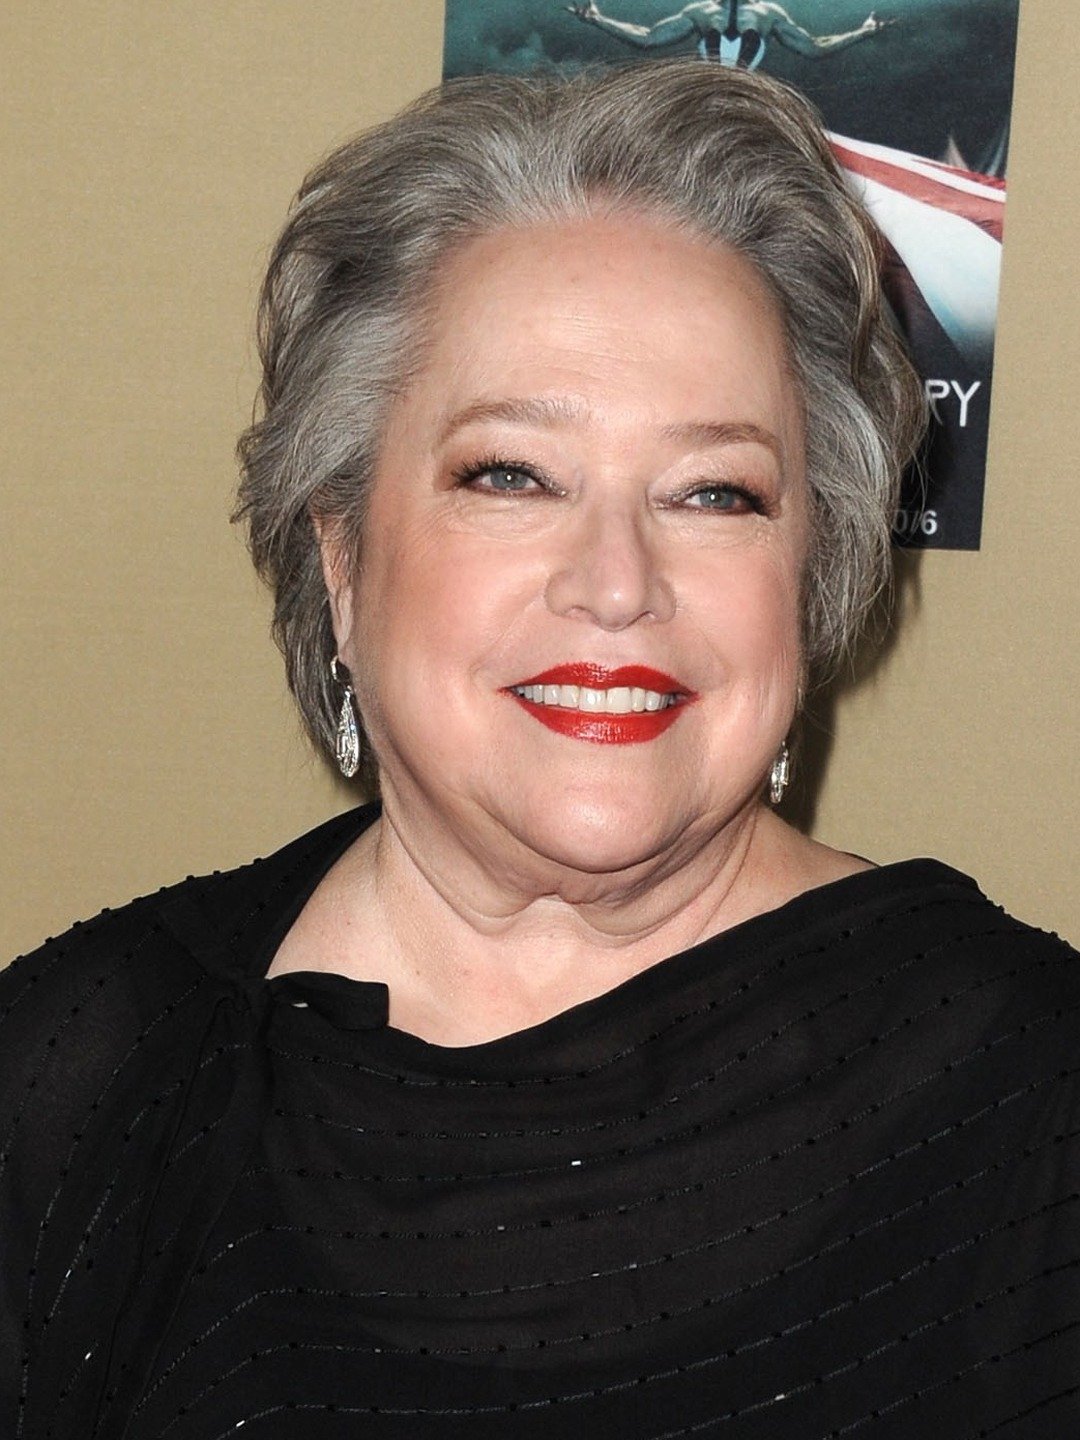 How tall is Kathy Bates?